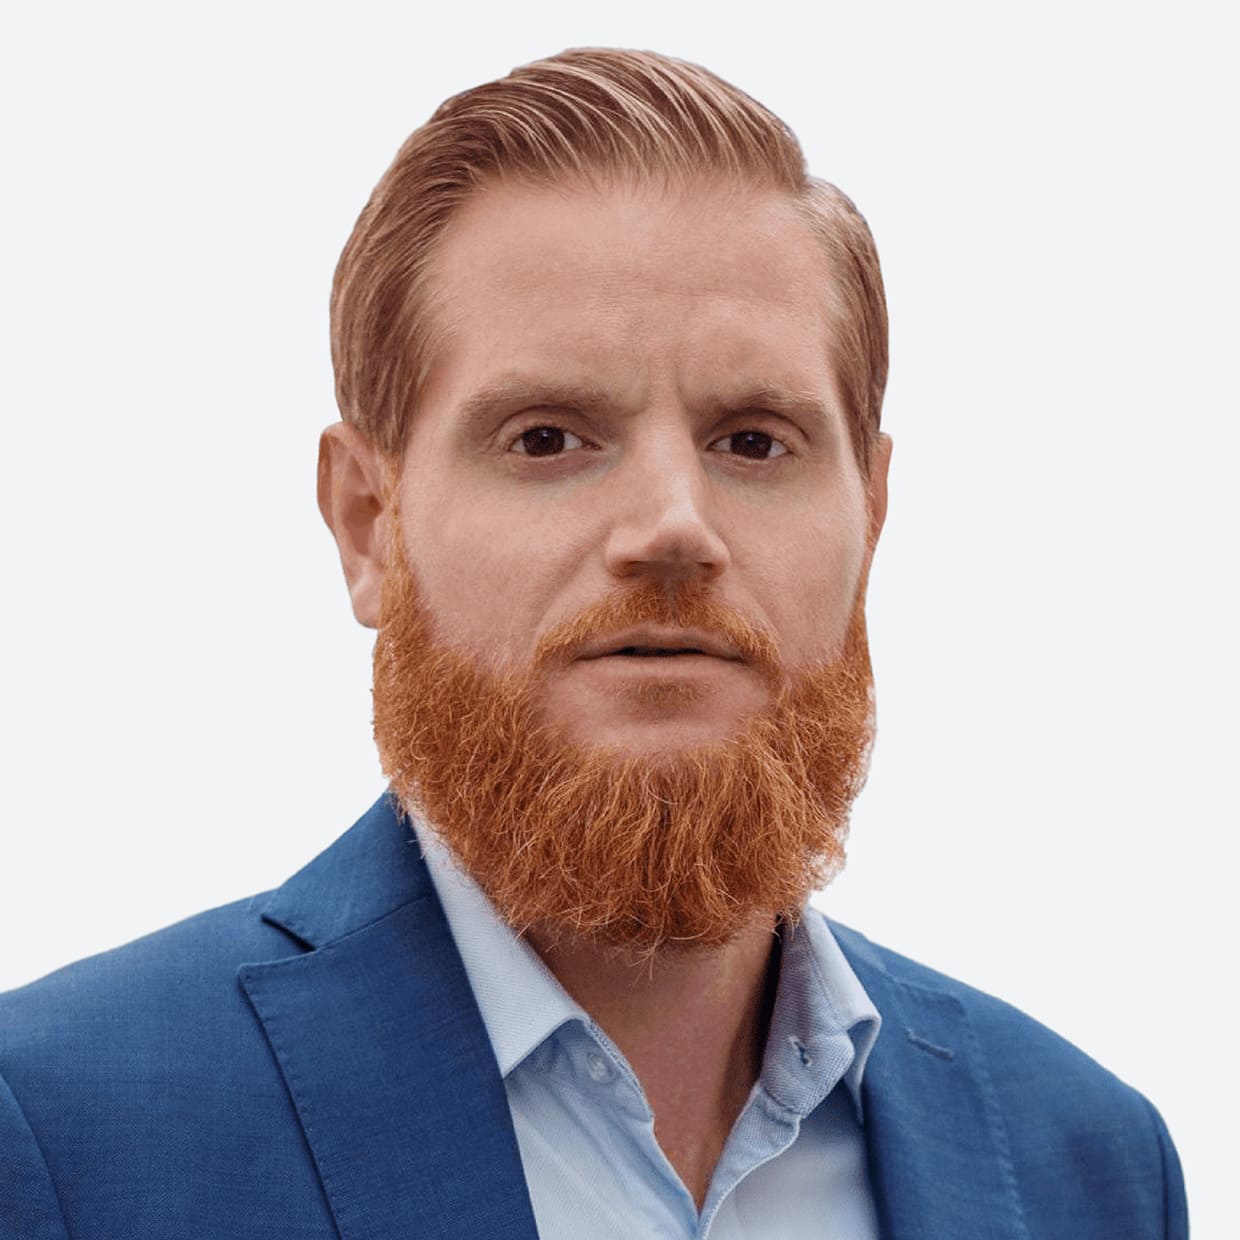 Internet Vikings - The new era of transferring data. Live with Max Schrems​ - Cybersecurity for Sports Betting & Online Casino Operators​ - PROACTIVE CYBER DEFENSE for iGaming & Online Sports Betting - Stefan Thelberg​